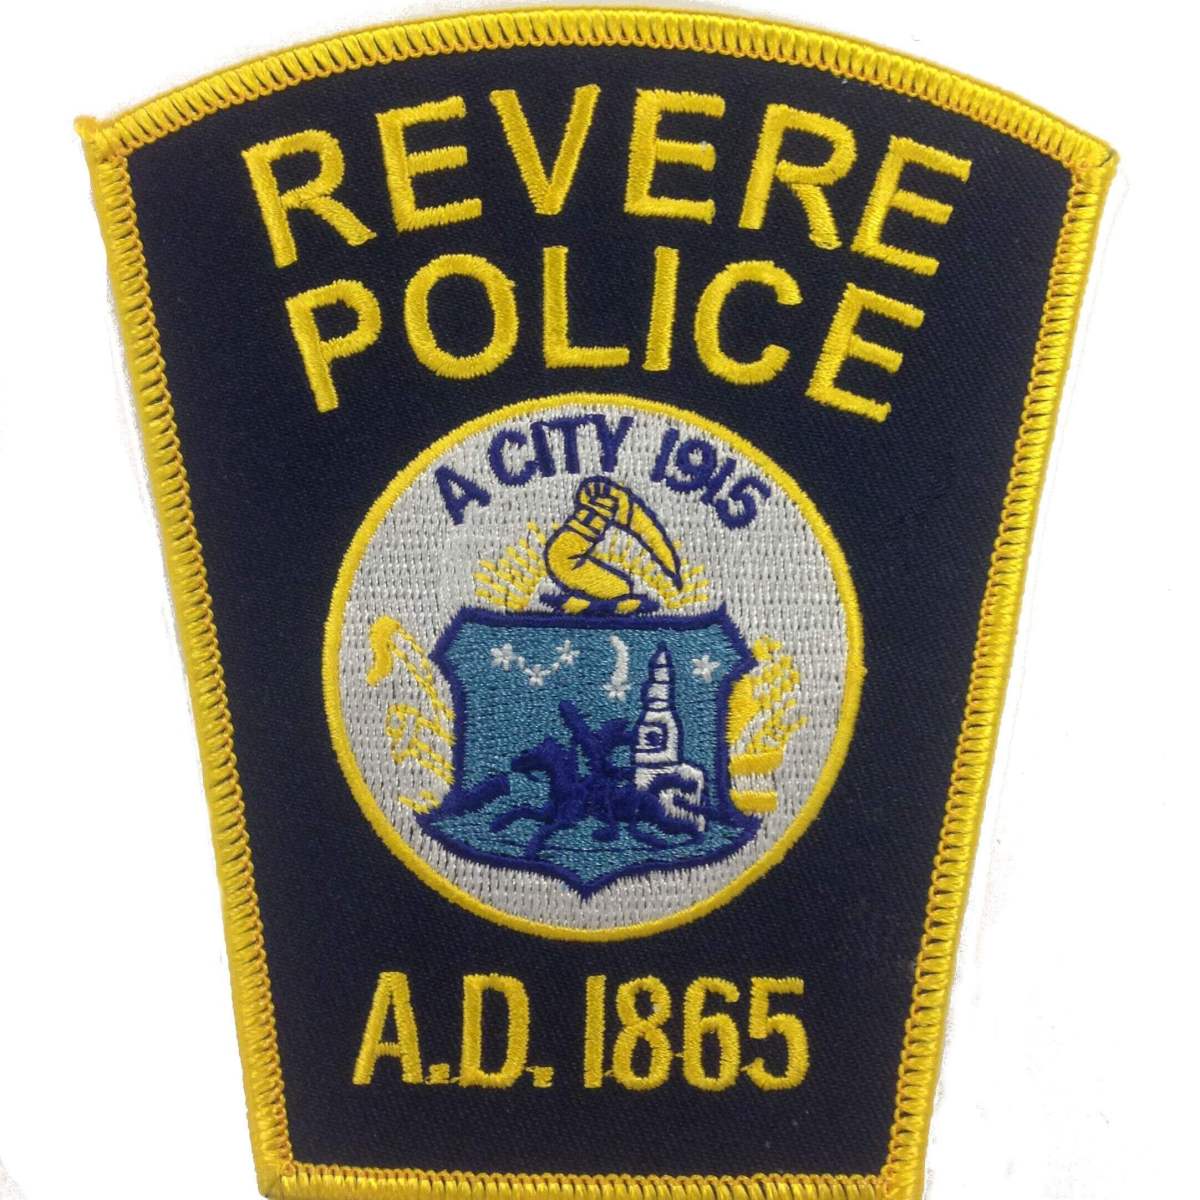 Revere man’s death under investigation following fight with police